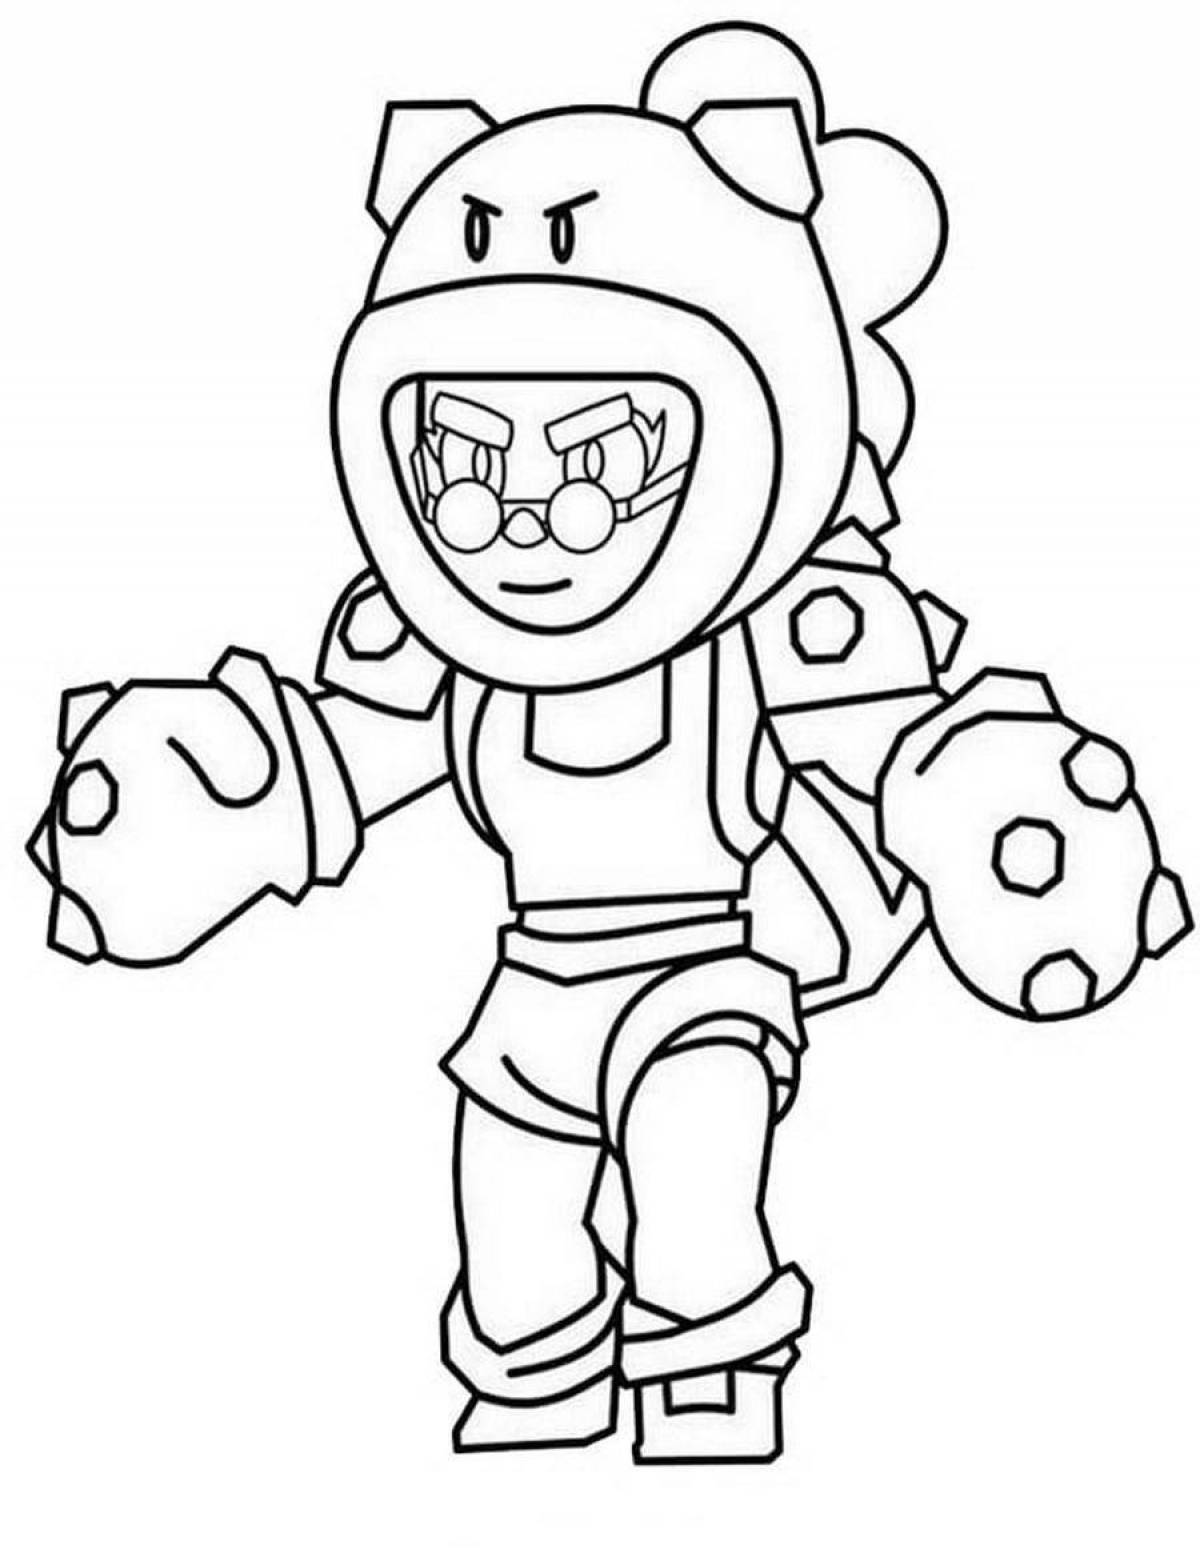 Adorable brown stars coloring page